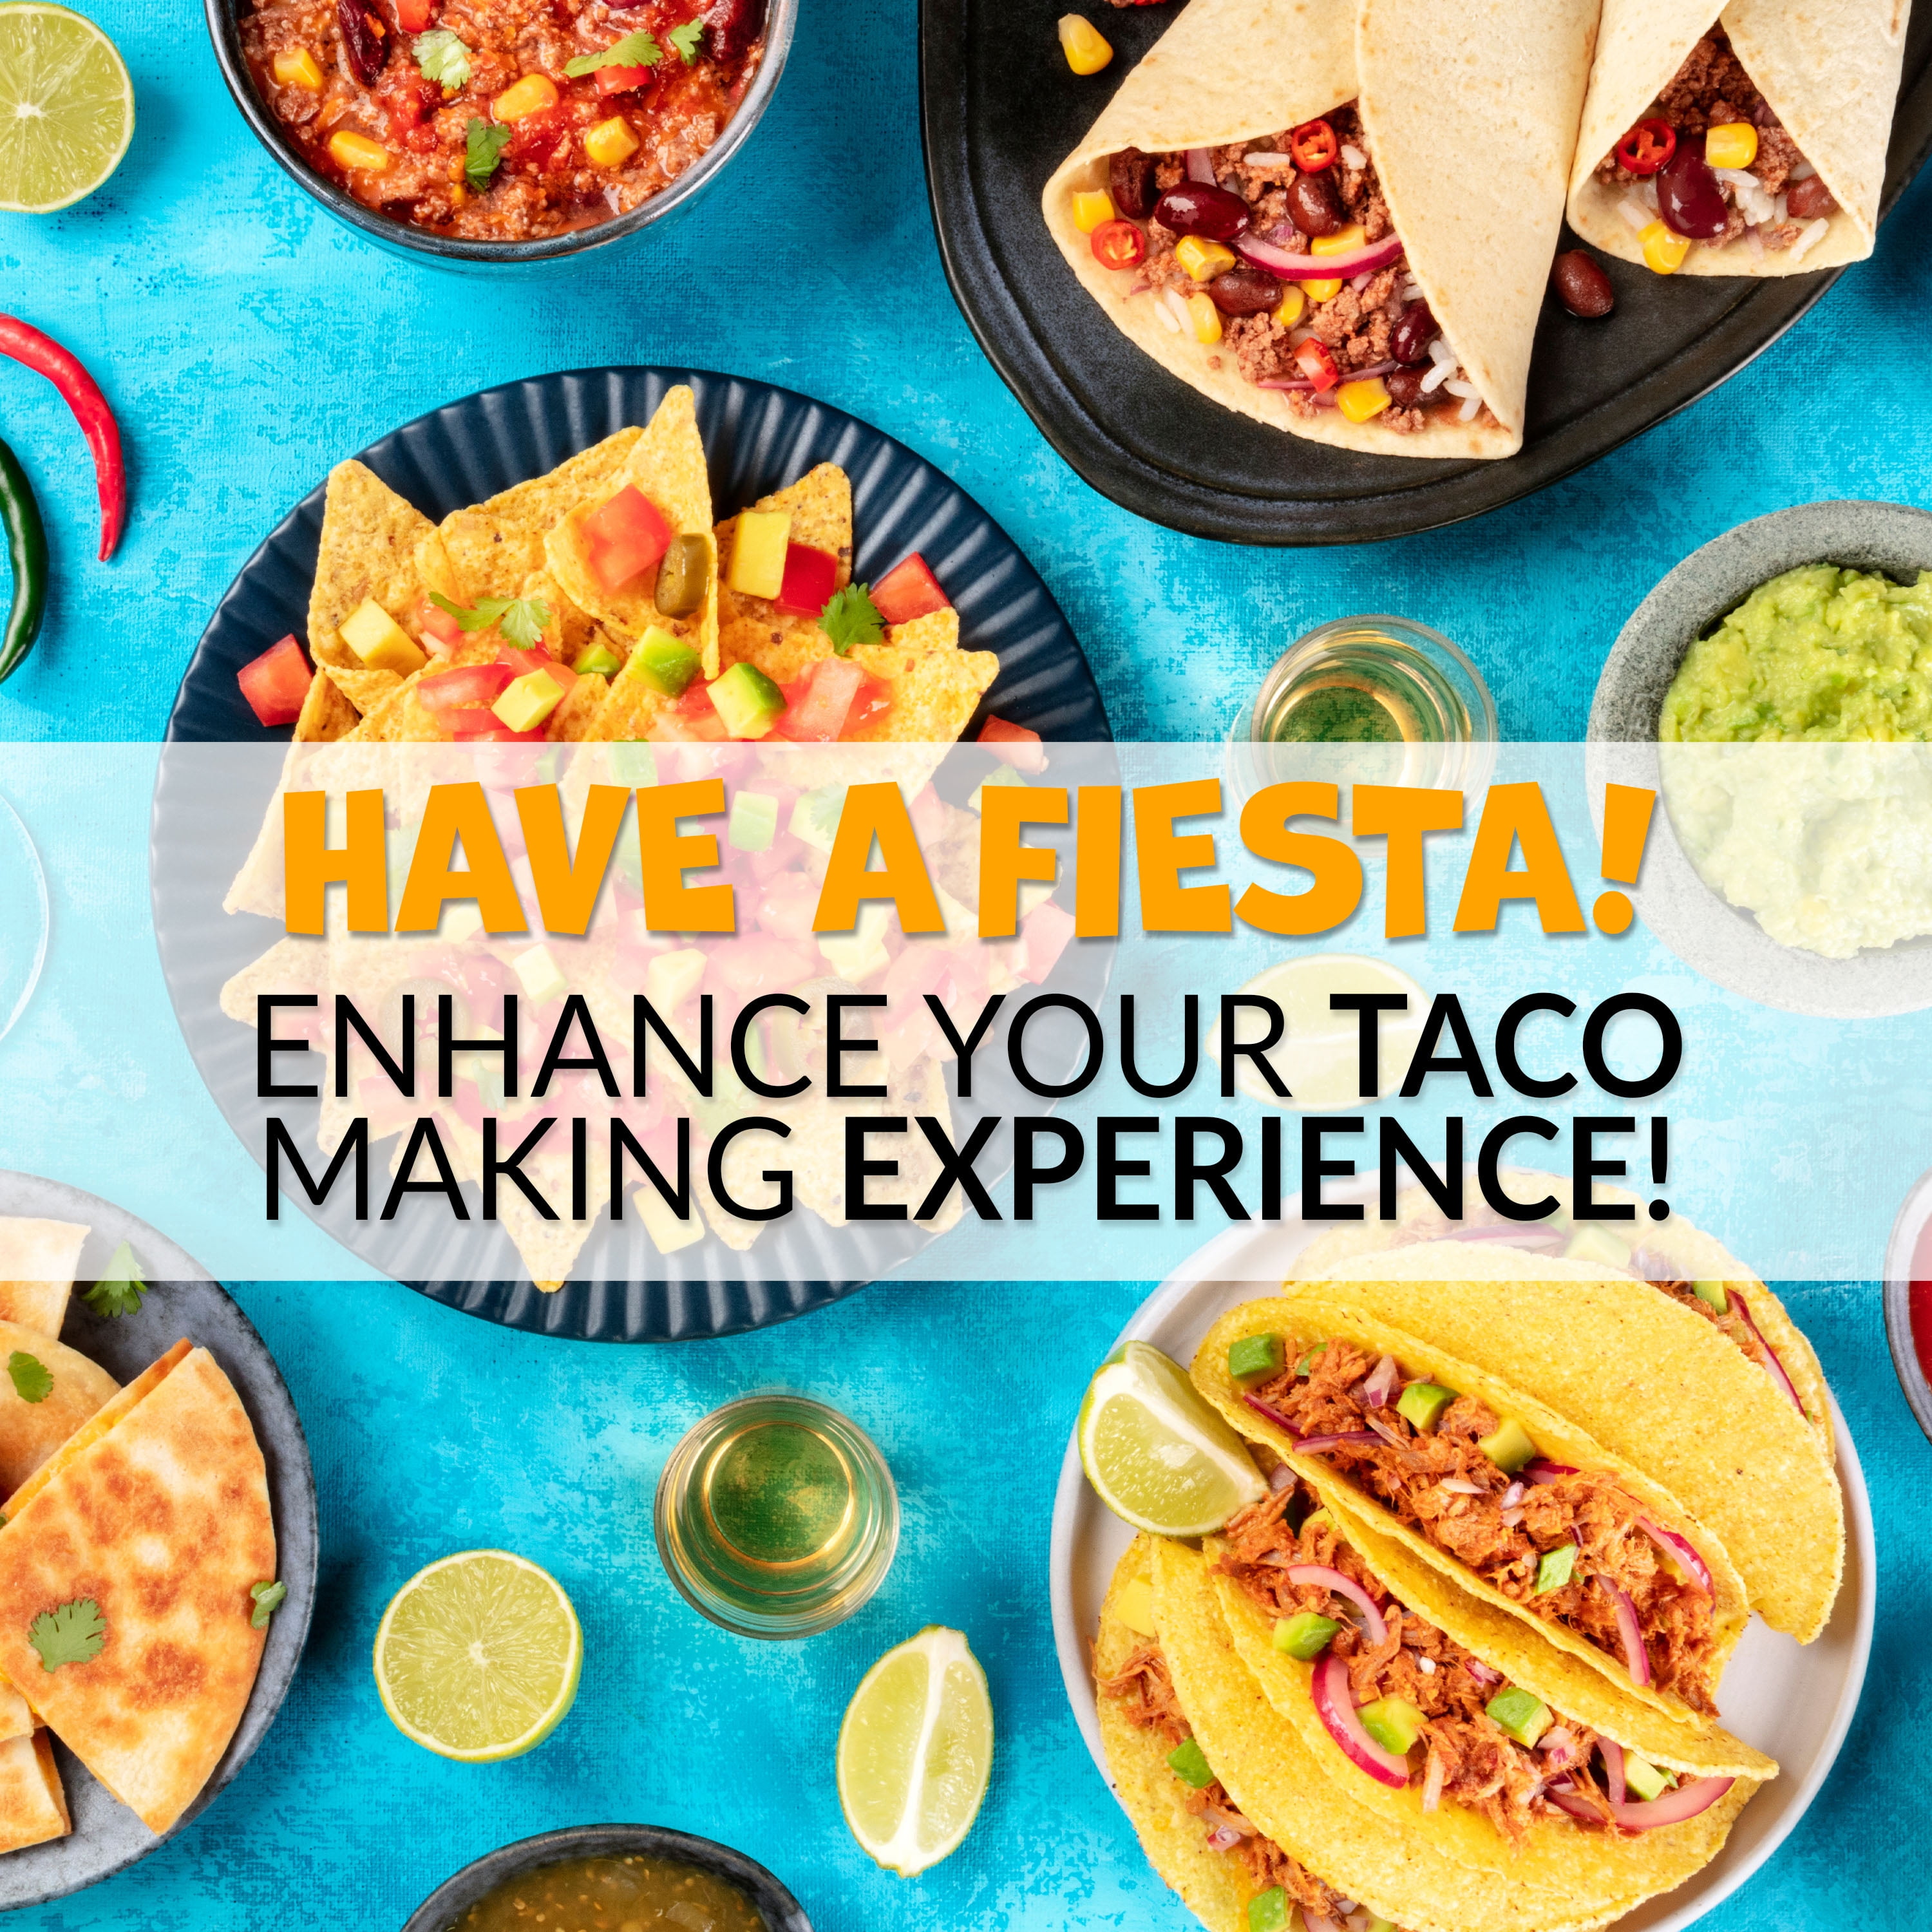 My Make-Ahead Taco Bar Saves our Suppertime! - Happy Strong Home